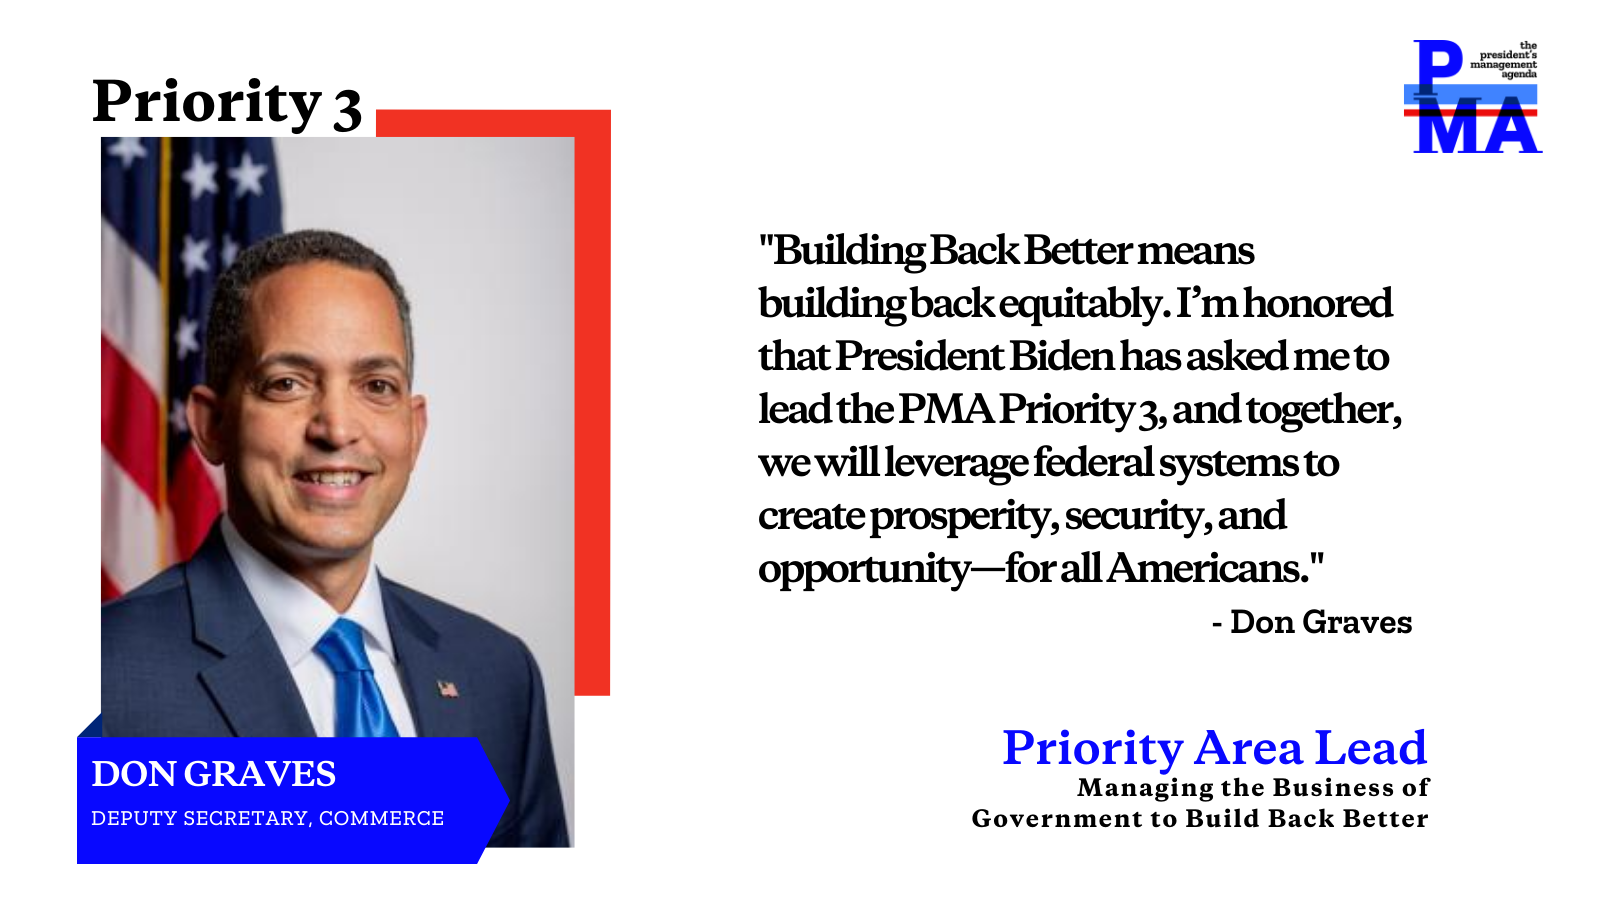 Social card of Don Graves with text: Building Back Better means building back equitably. I'm honored that President Biden has asked me to lead the PMA Priority 3, and together, we will leverage federal systems to create prosperity, security, and opportunity -- for all Americans.